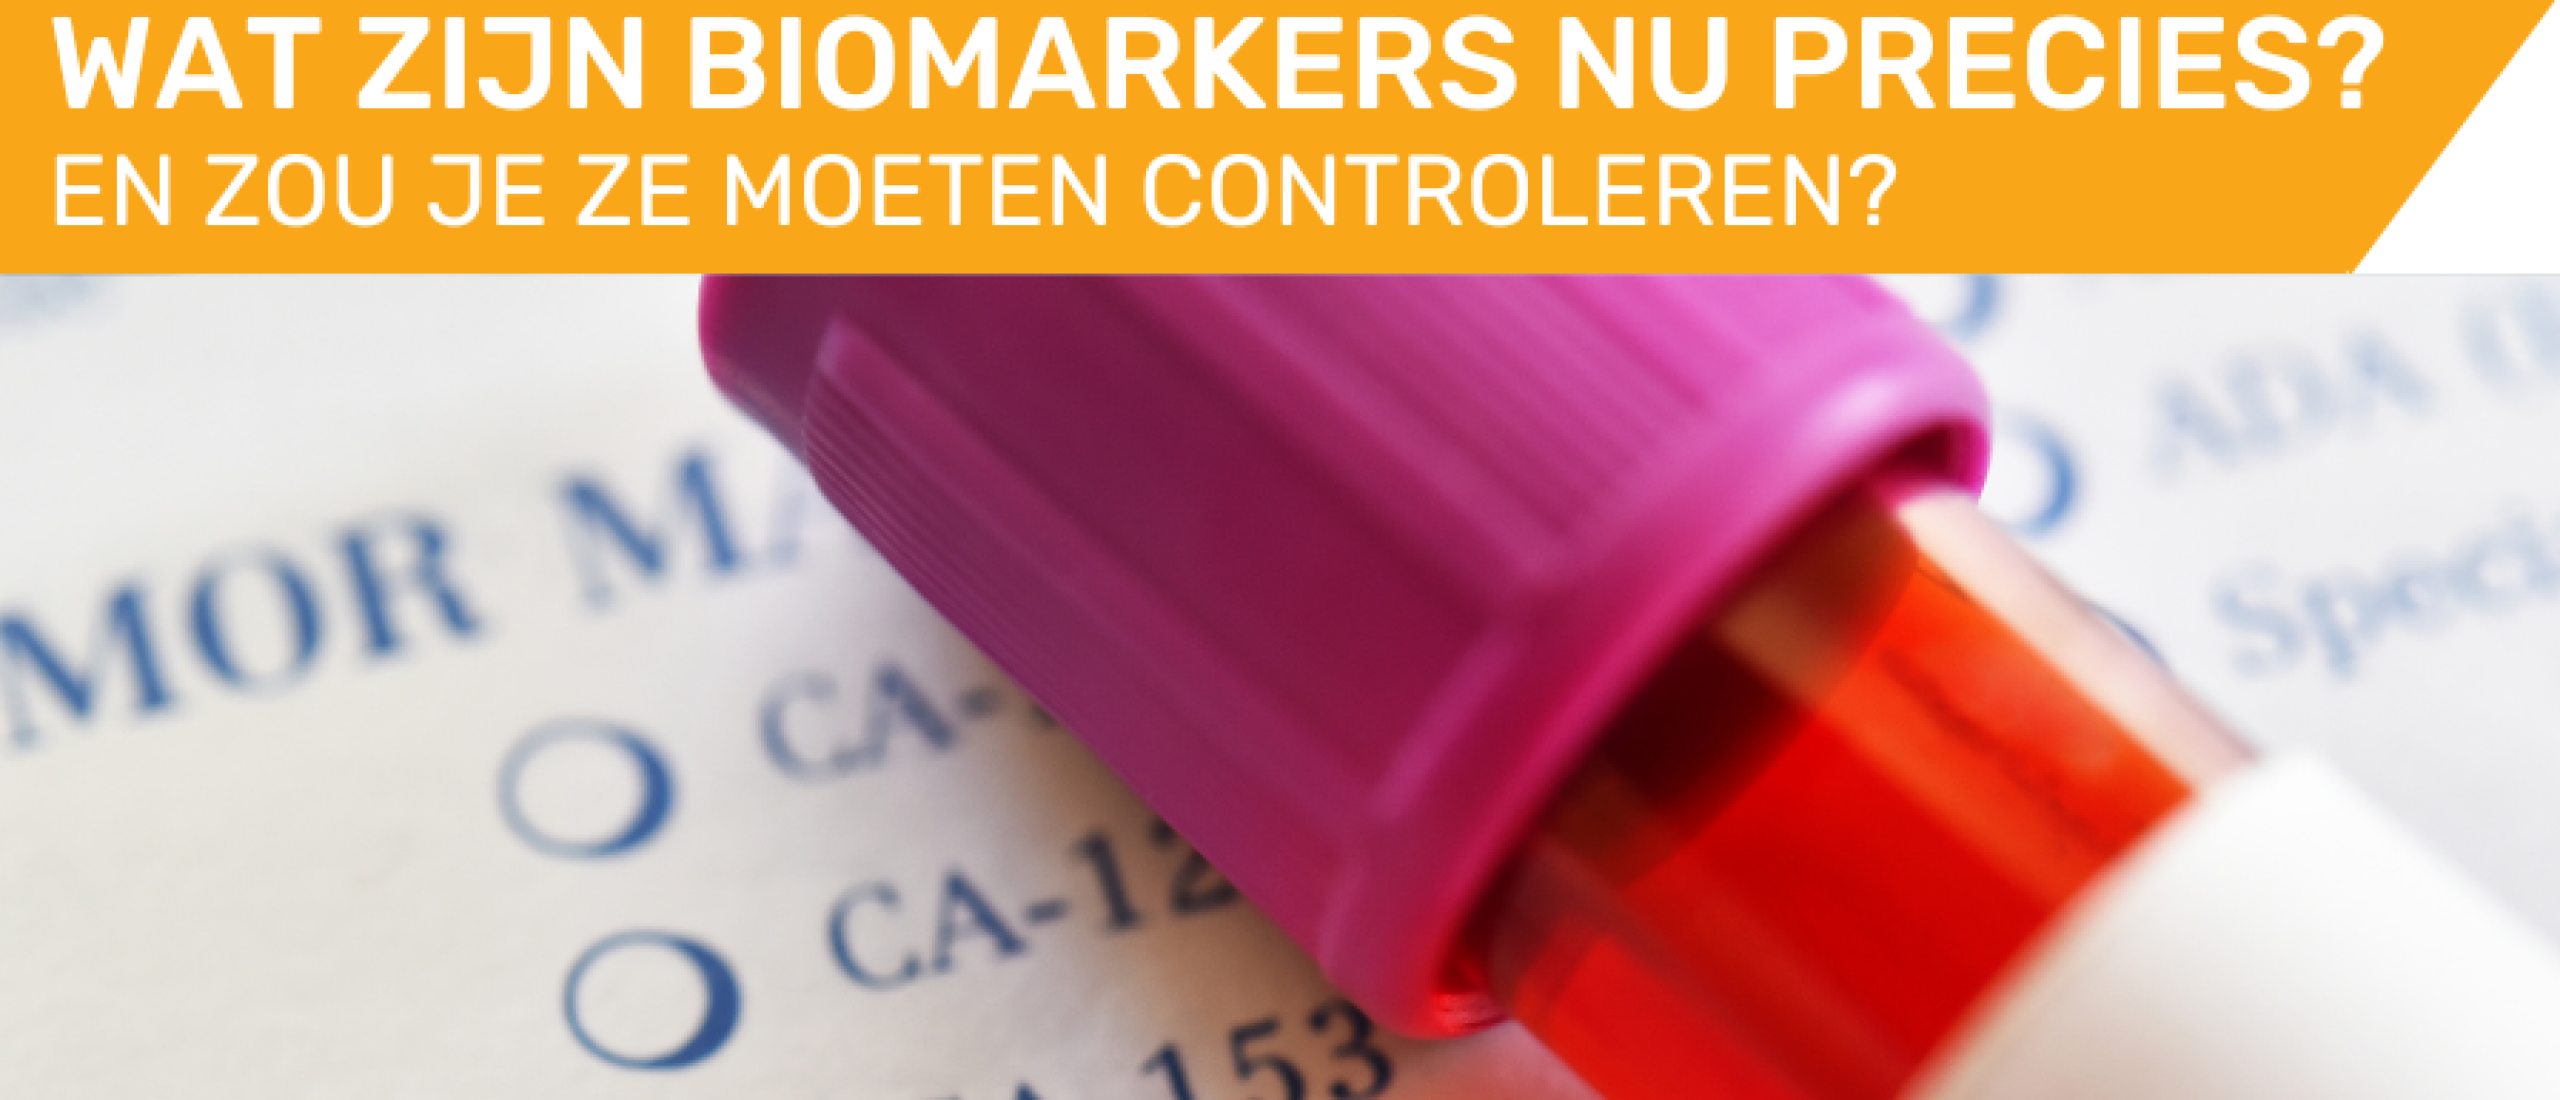 What exactly are biomarkers? And why are they so important?